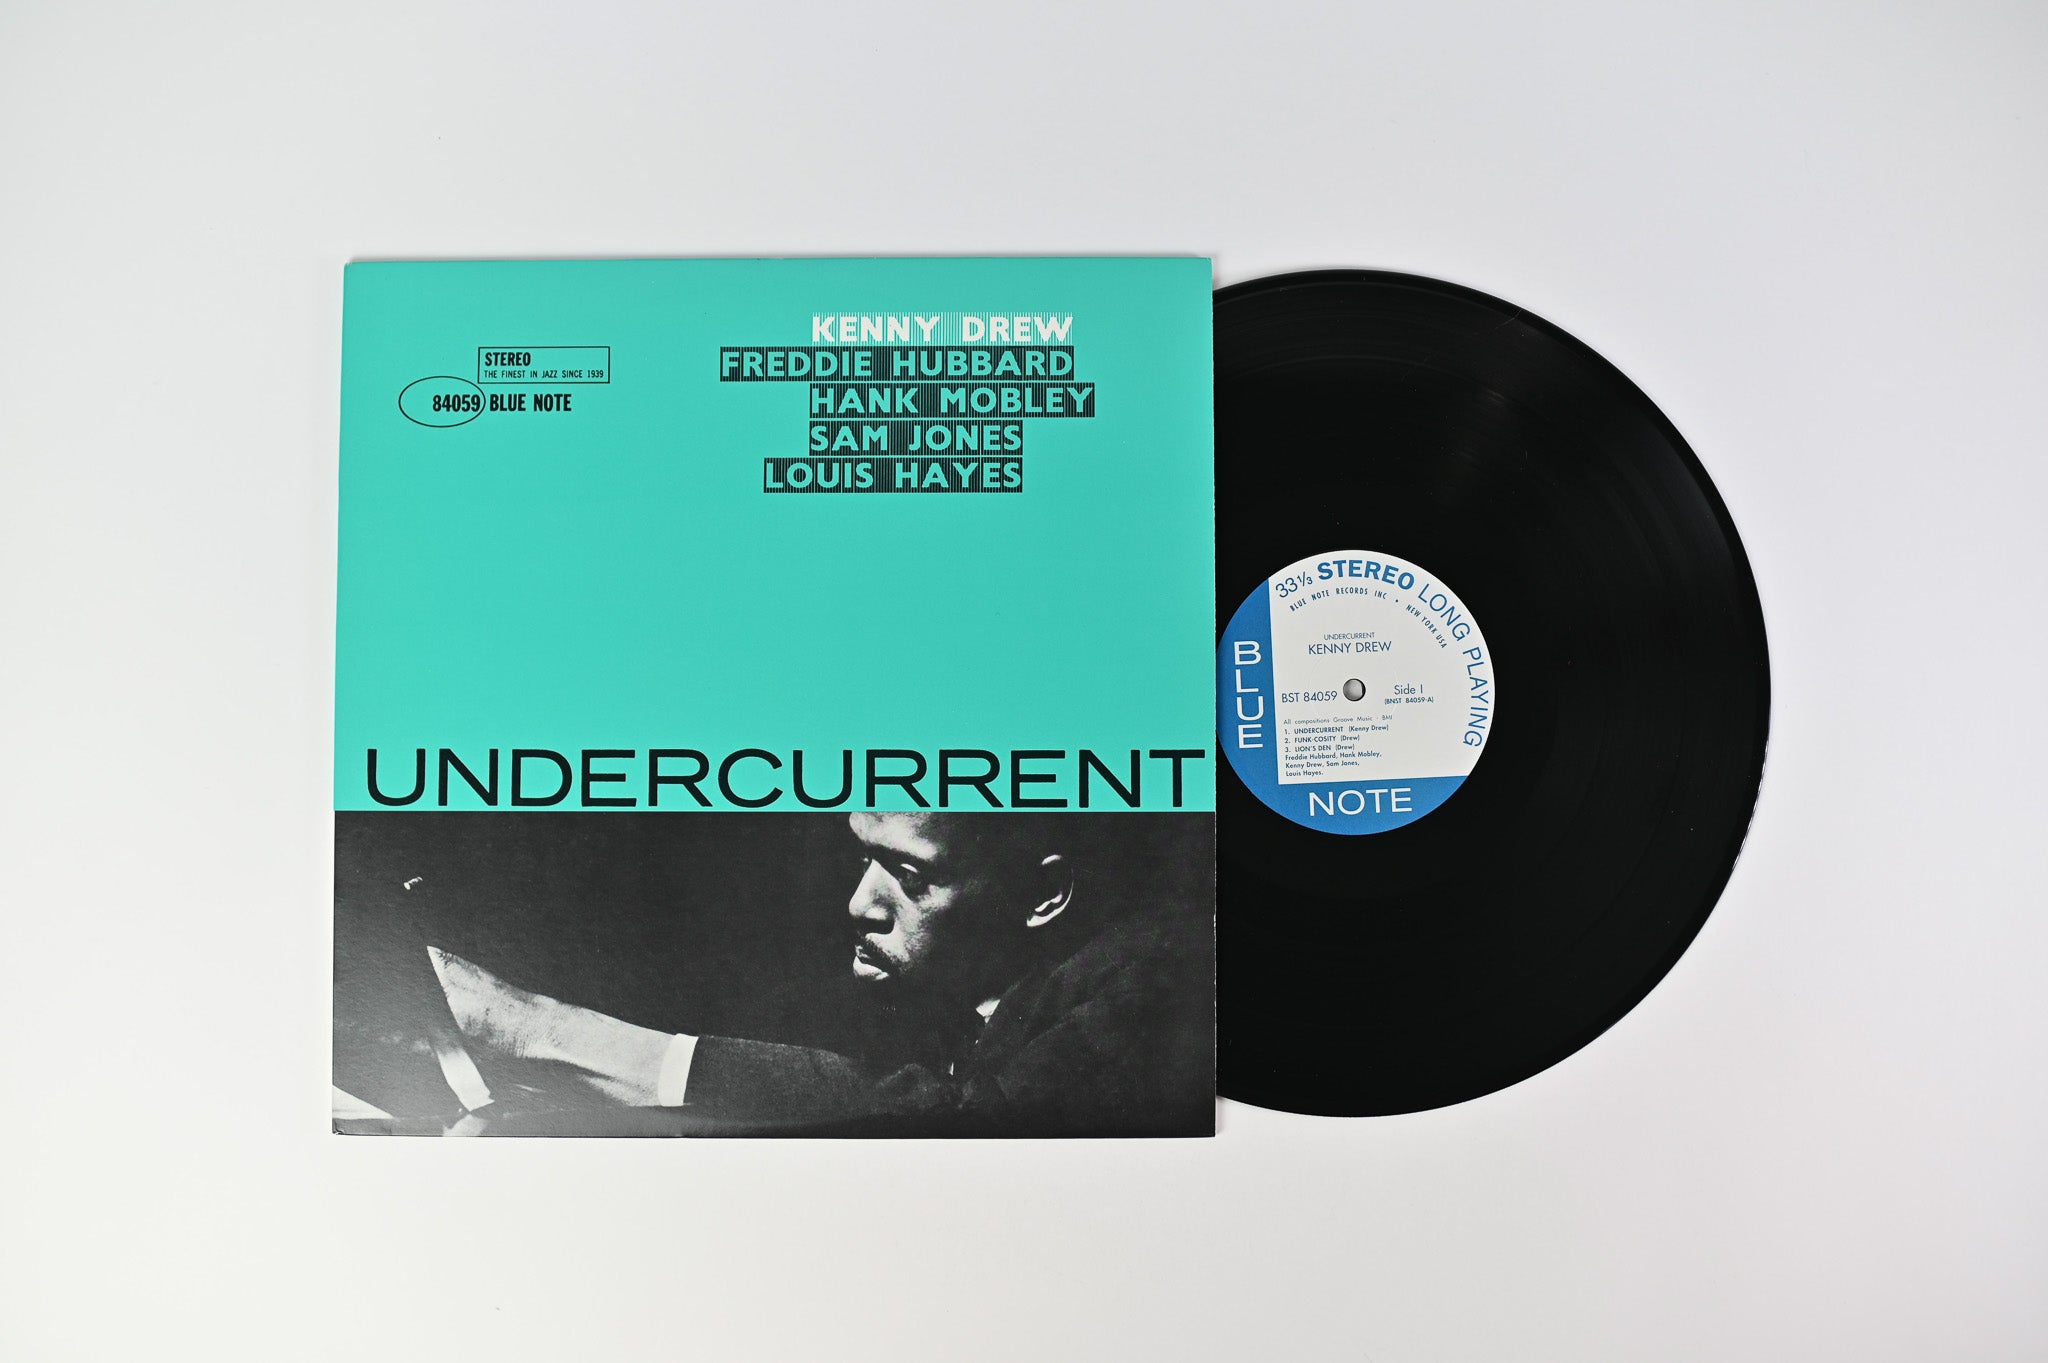 Kenny Drew - Undercurrent on Blue Note 1998 Classic Records Reissue